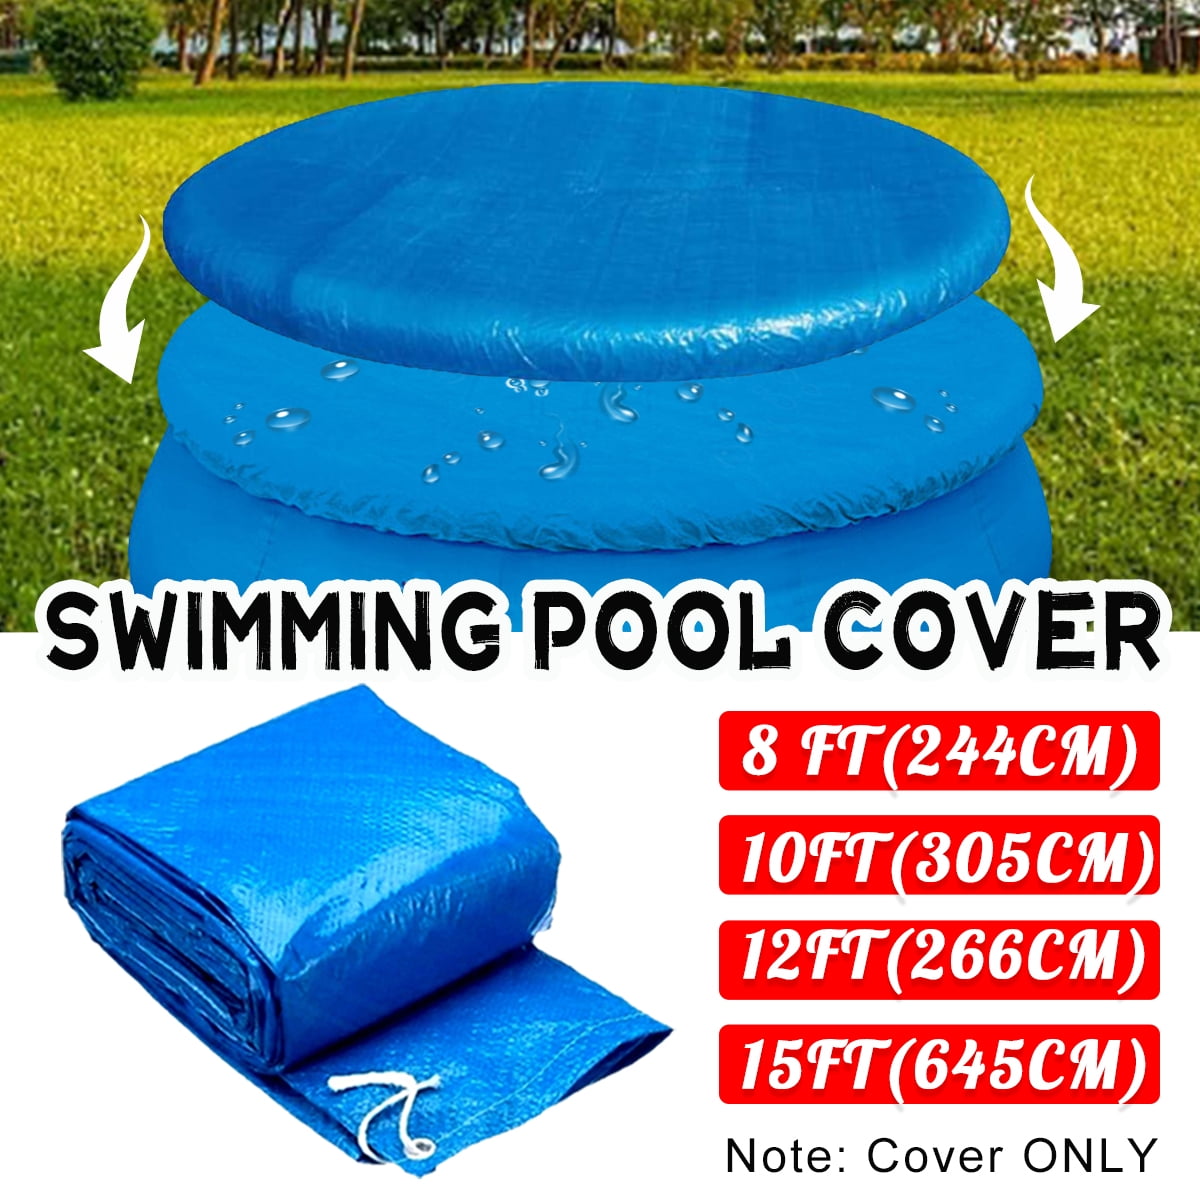 10 & 12FT POOL COVER WITH ROPE TIES INFLATABLE PADDLING SWIMMING POOLS 8 